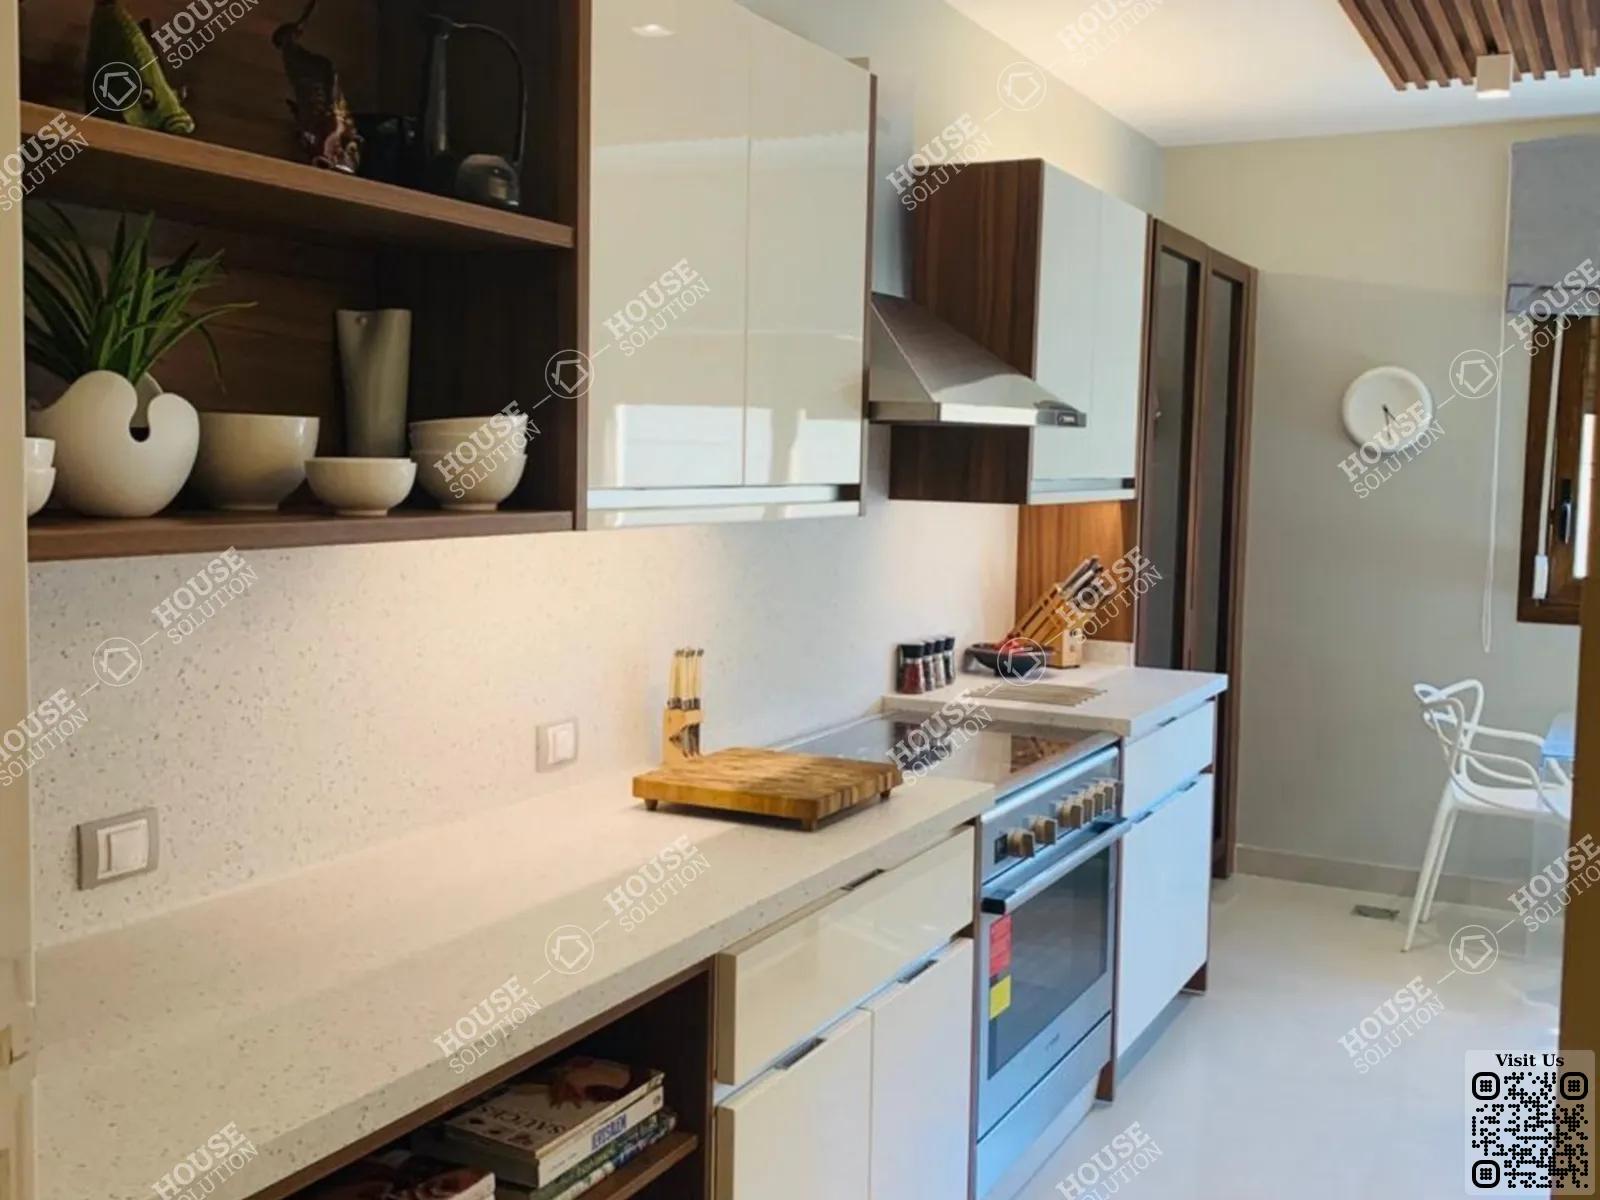 KITCHEN  @ Apartments For Rent In Maadi Maadi Sarayat Area: 300 m² consists of 4 Bedrooms 4 Bathrooms Modern furnished 5 stars #5900-1